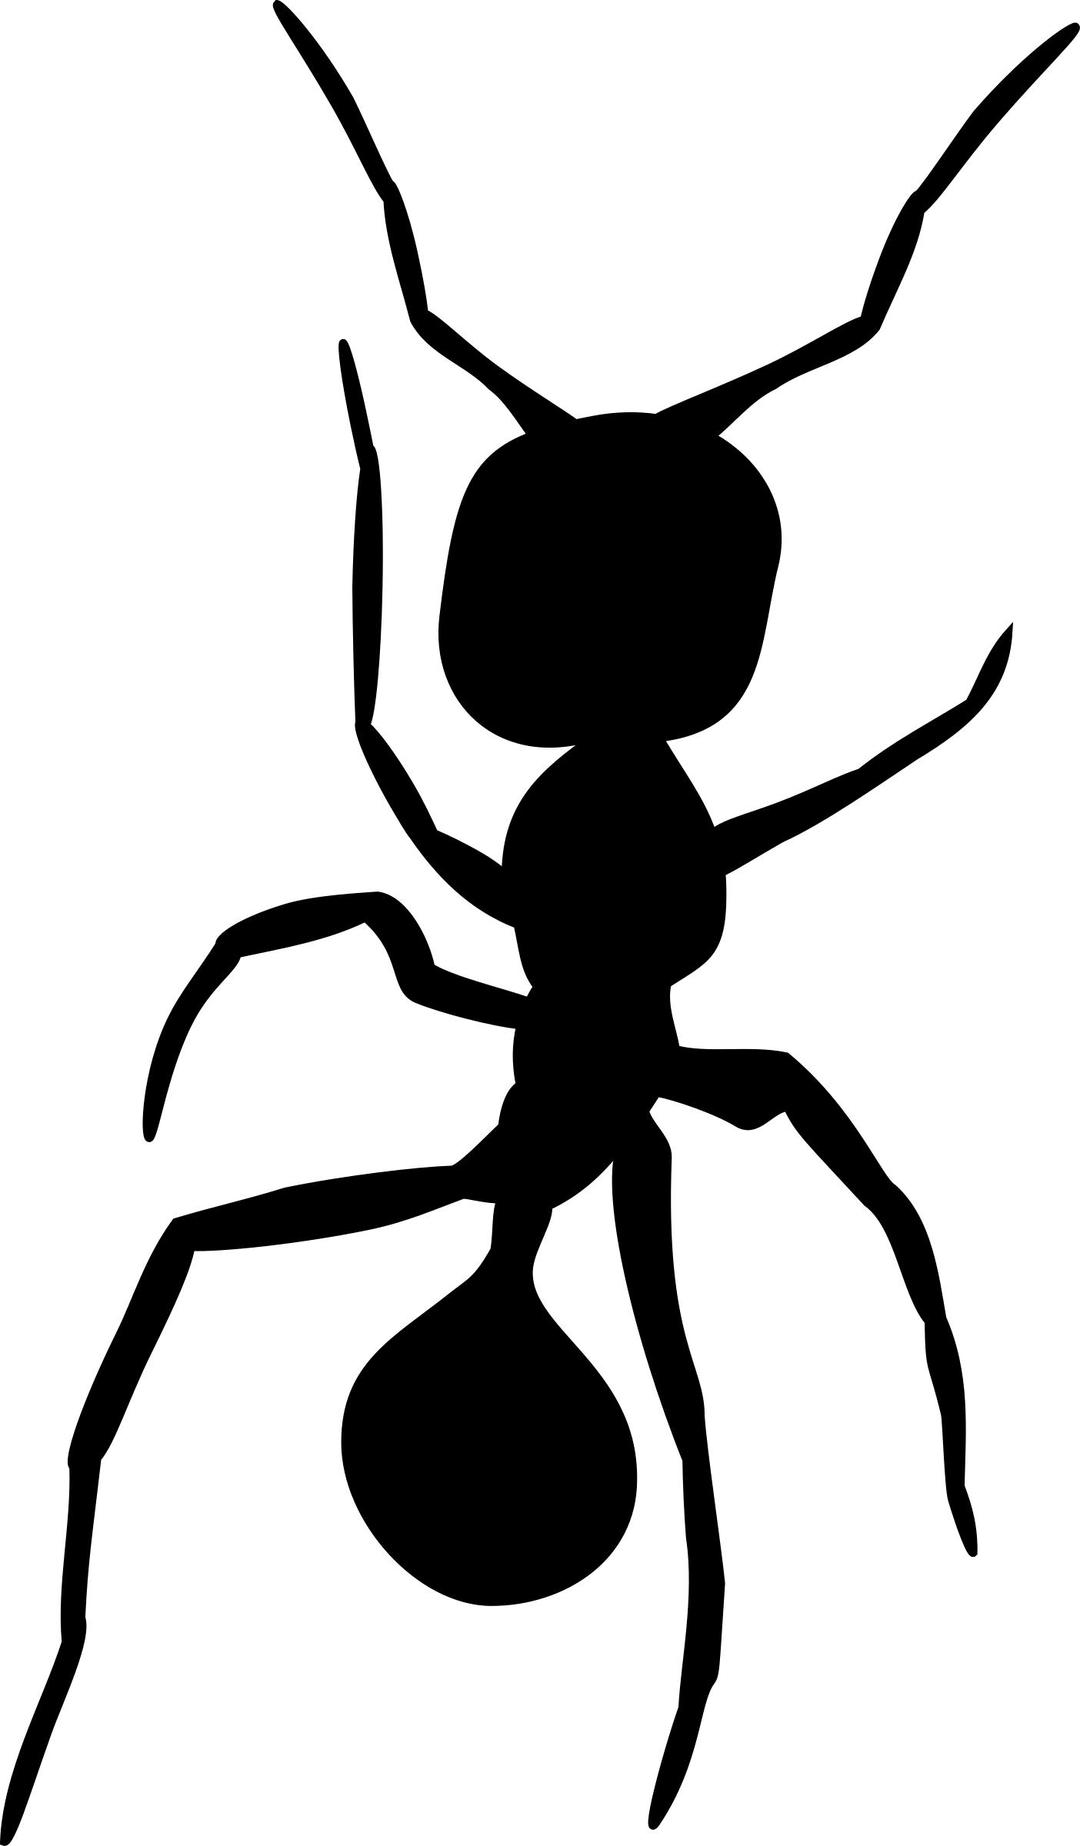 Ant silhouette 2 png transparent